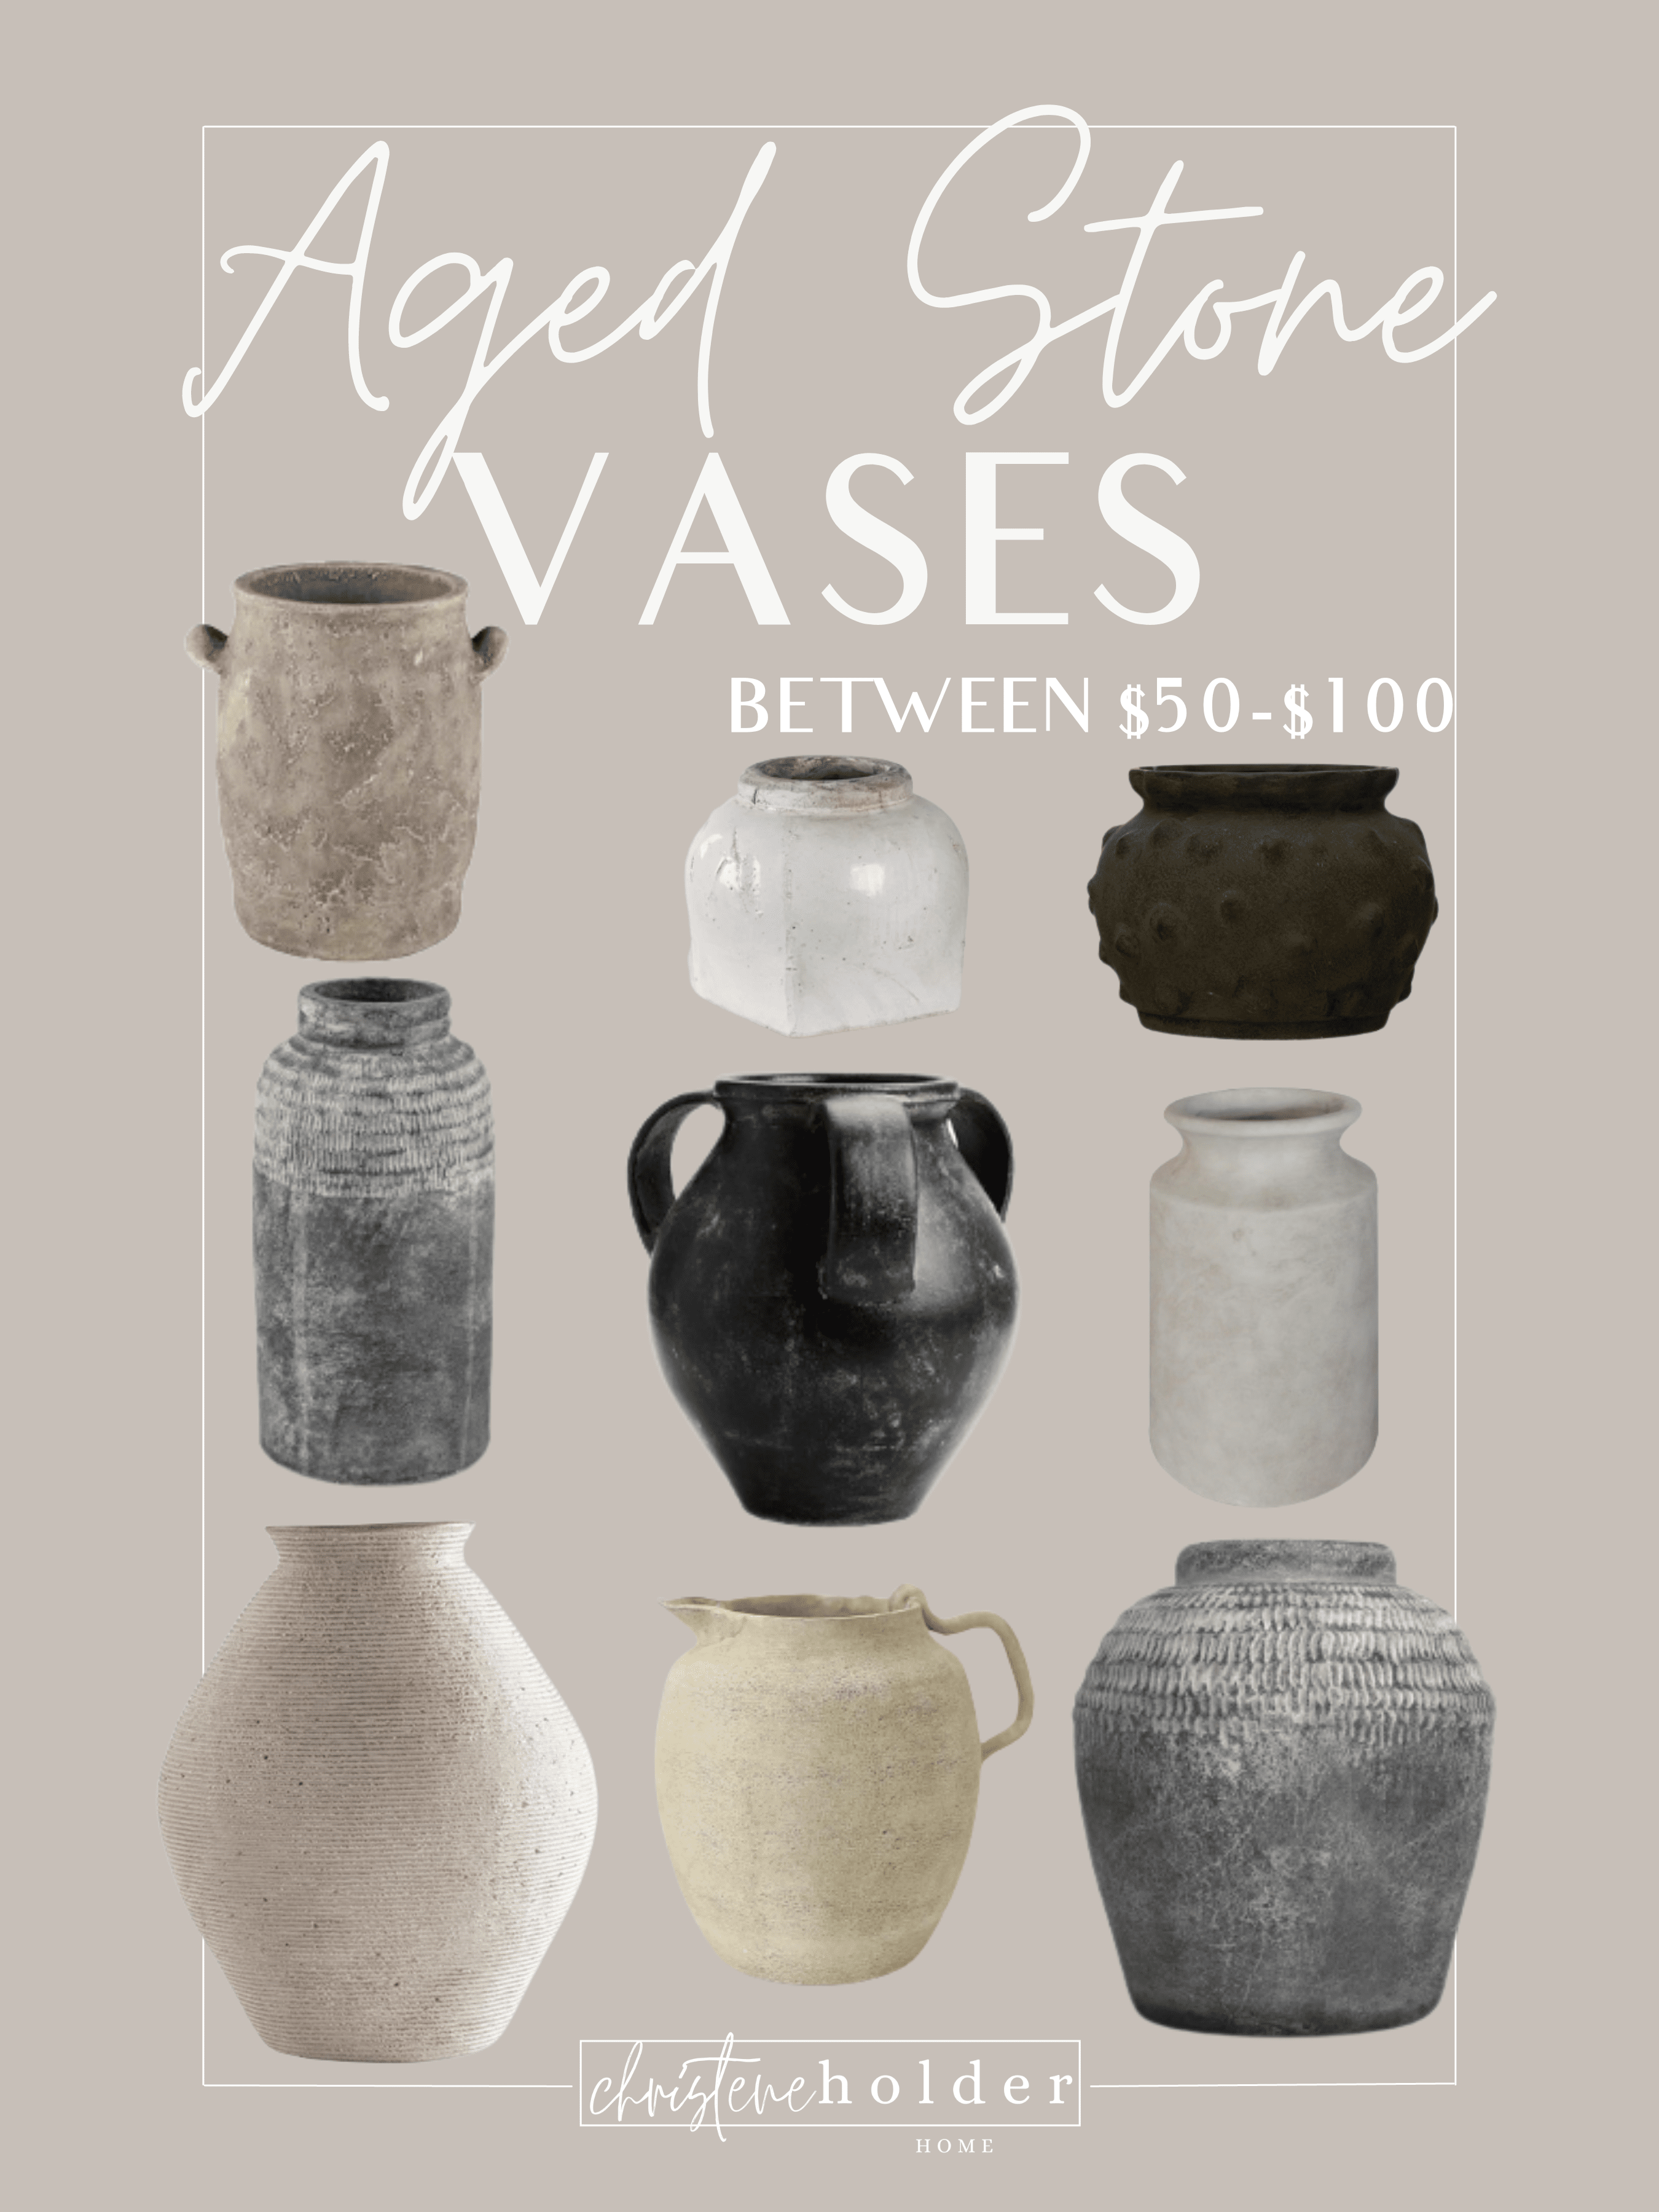 aged stone vases between $50 and $100